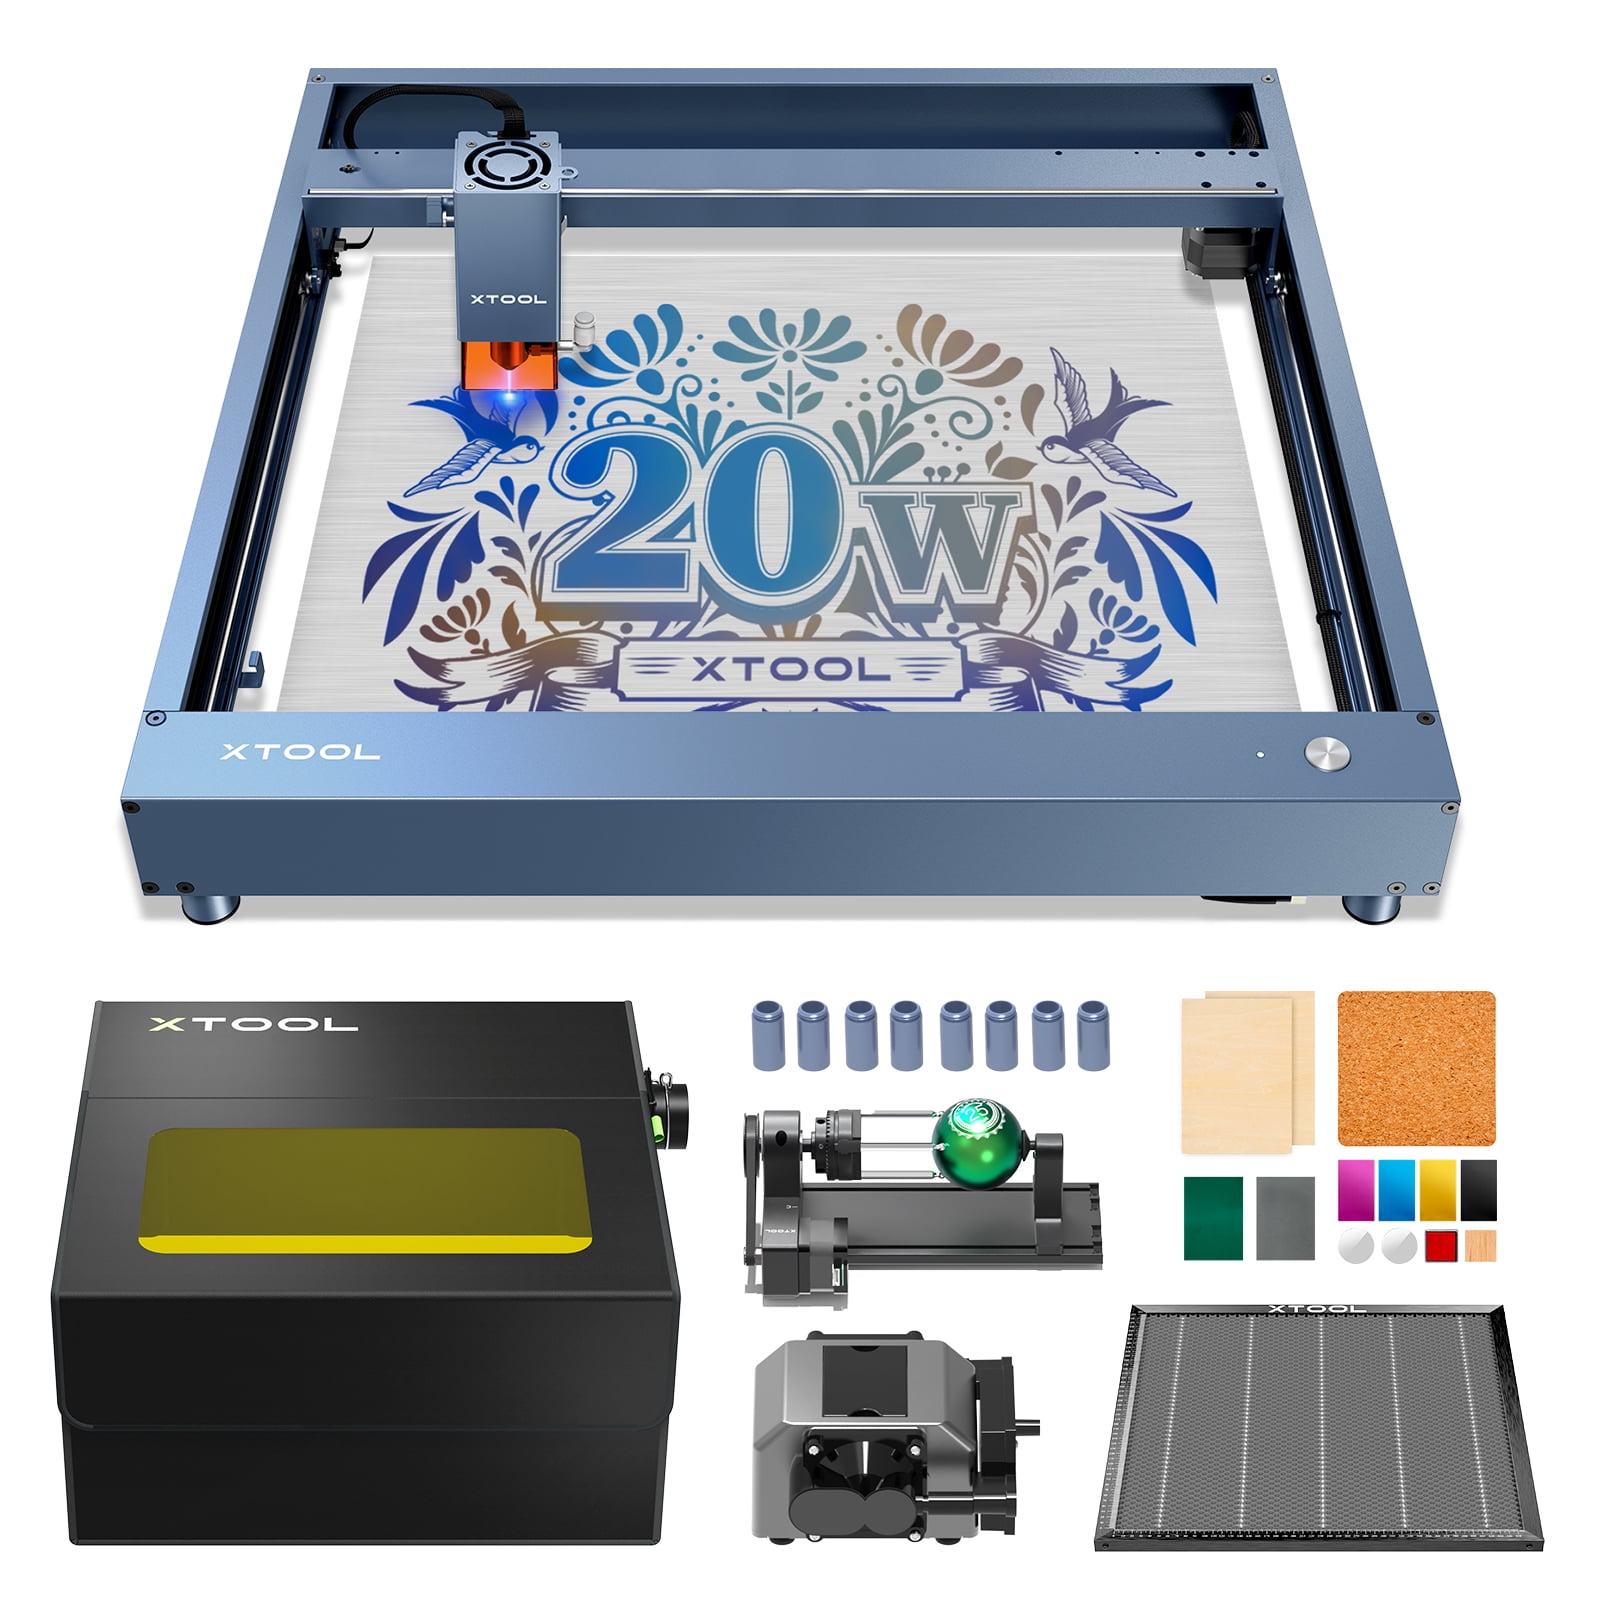 xTool D1 Pro 20W Laser Engraver Deluxe Bundle, with RA2 Pro Rotary,  Foldable Enclosure, Airflow Adjustable Air Assist, Honeycomb 